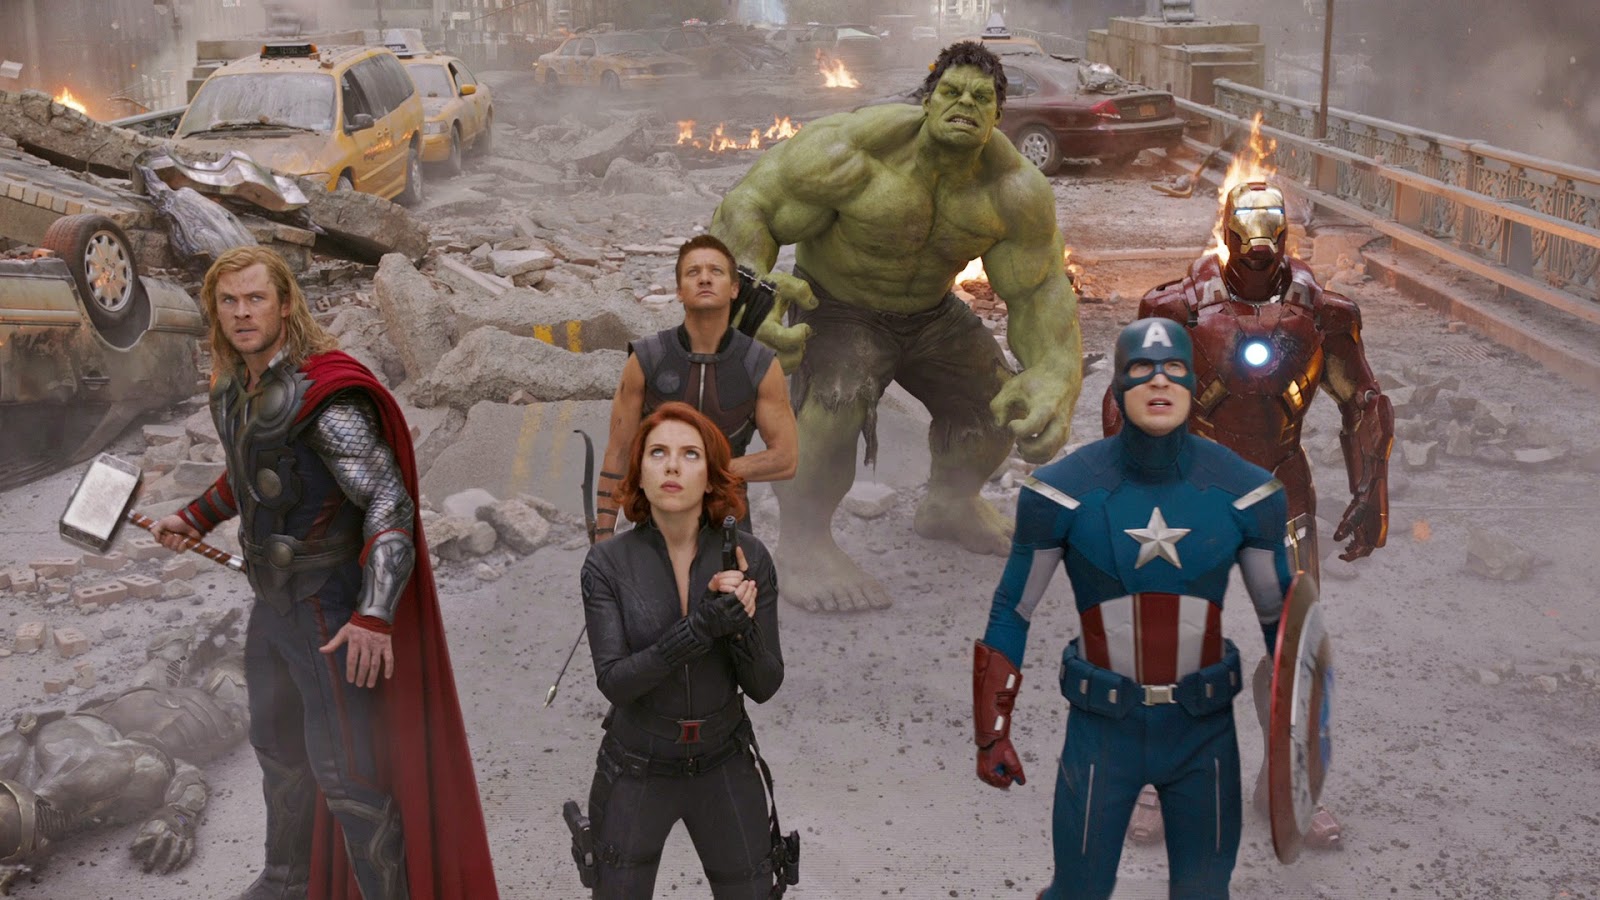 Rate Highest-Grossing Movies of Last 15 Years to Know I… Quiz The Avengers